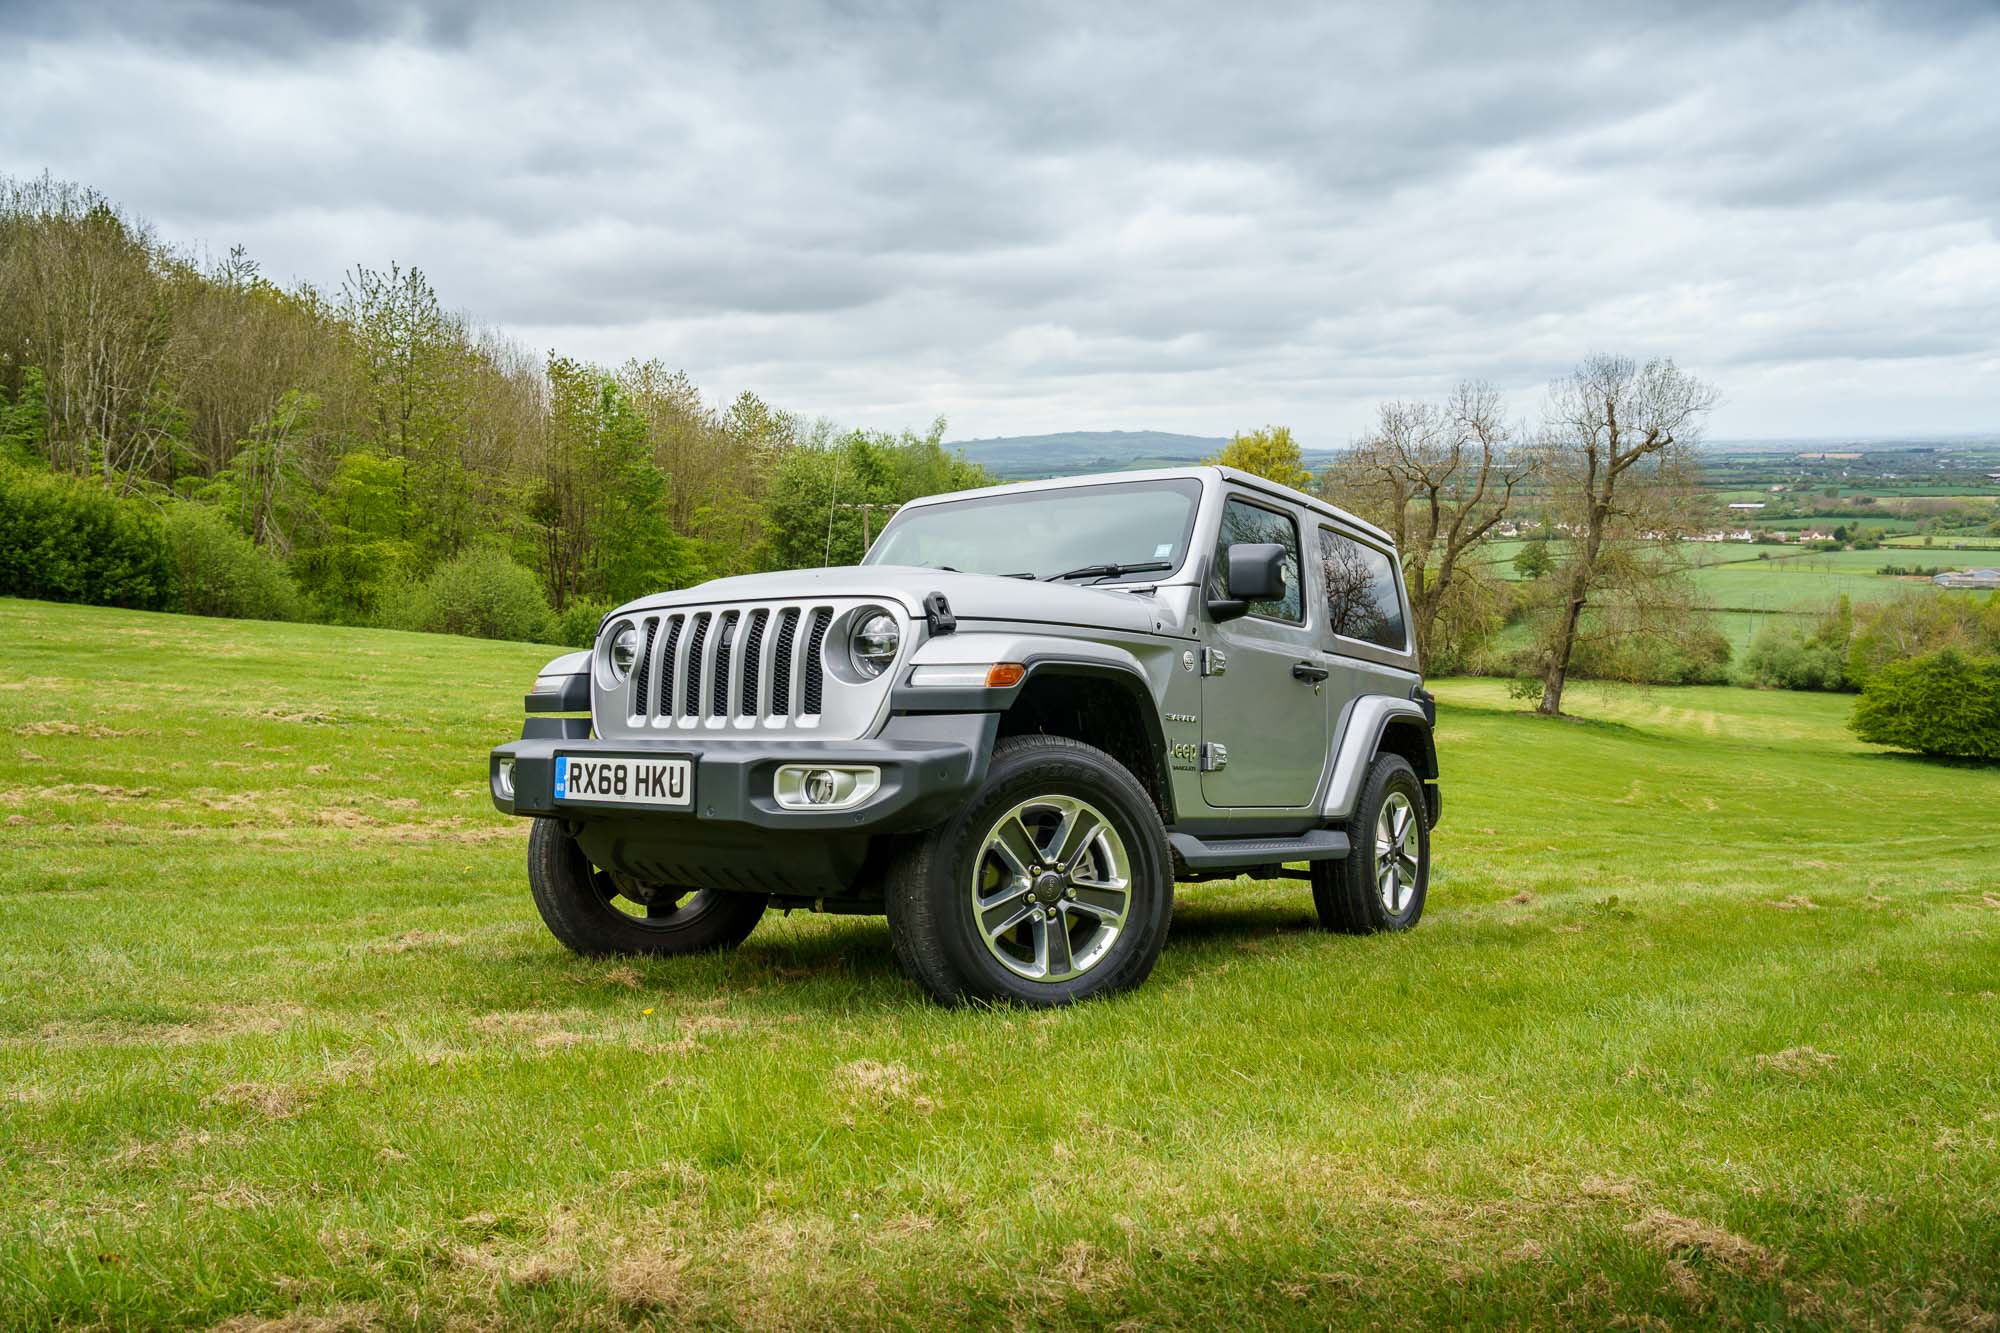 Best And Worst Jeep Wrangler Years: Models, Stats, & Examples